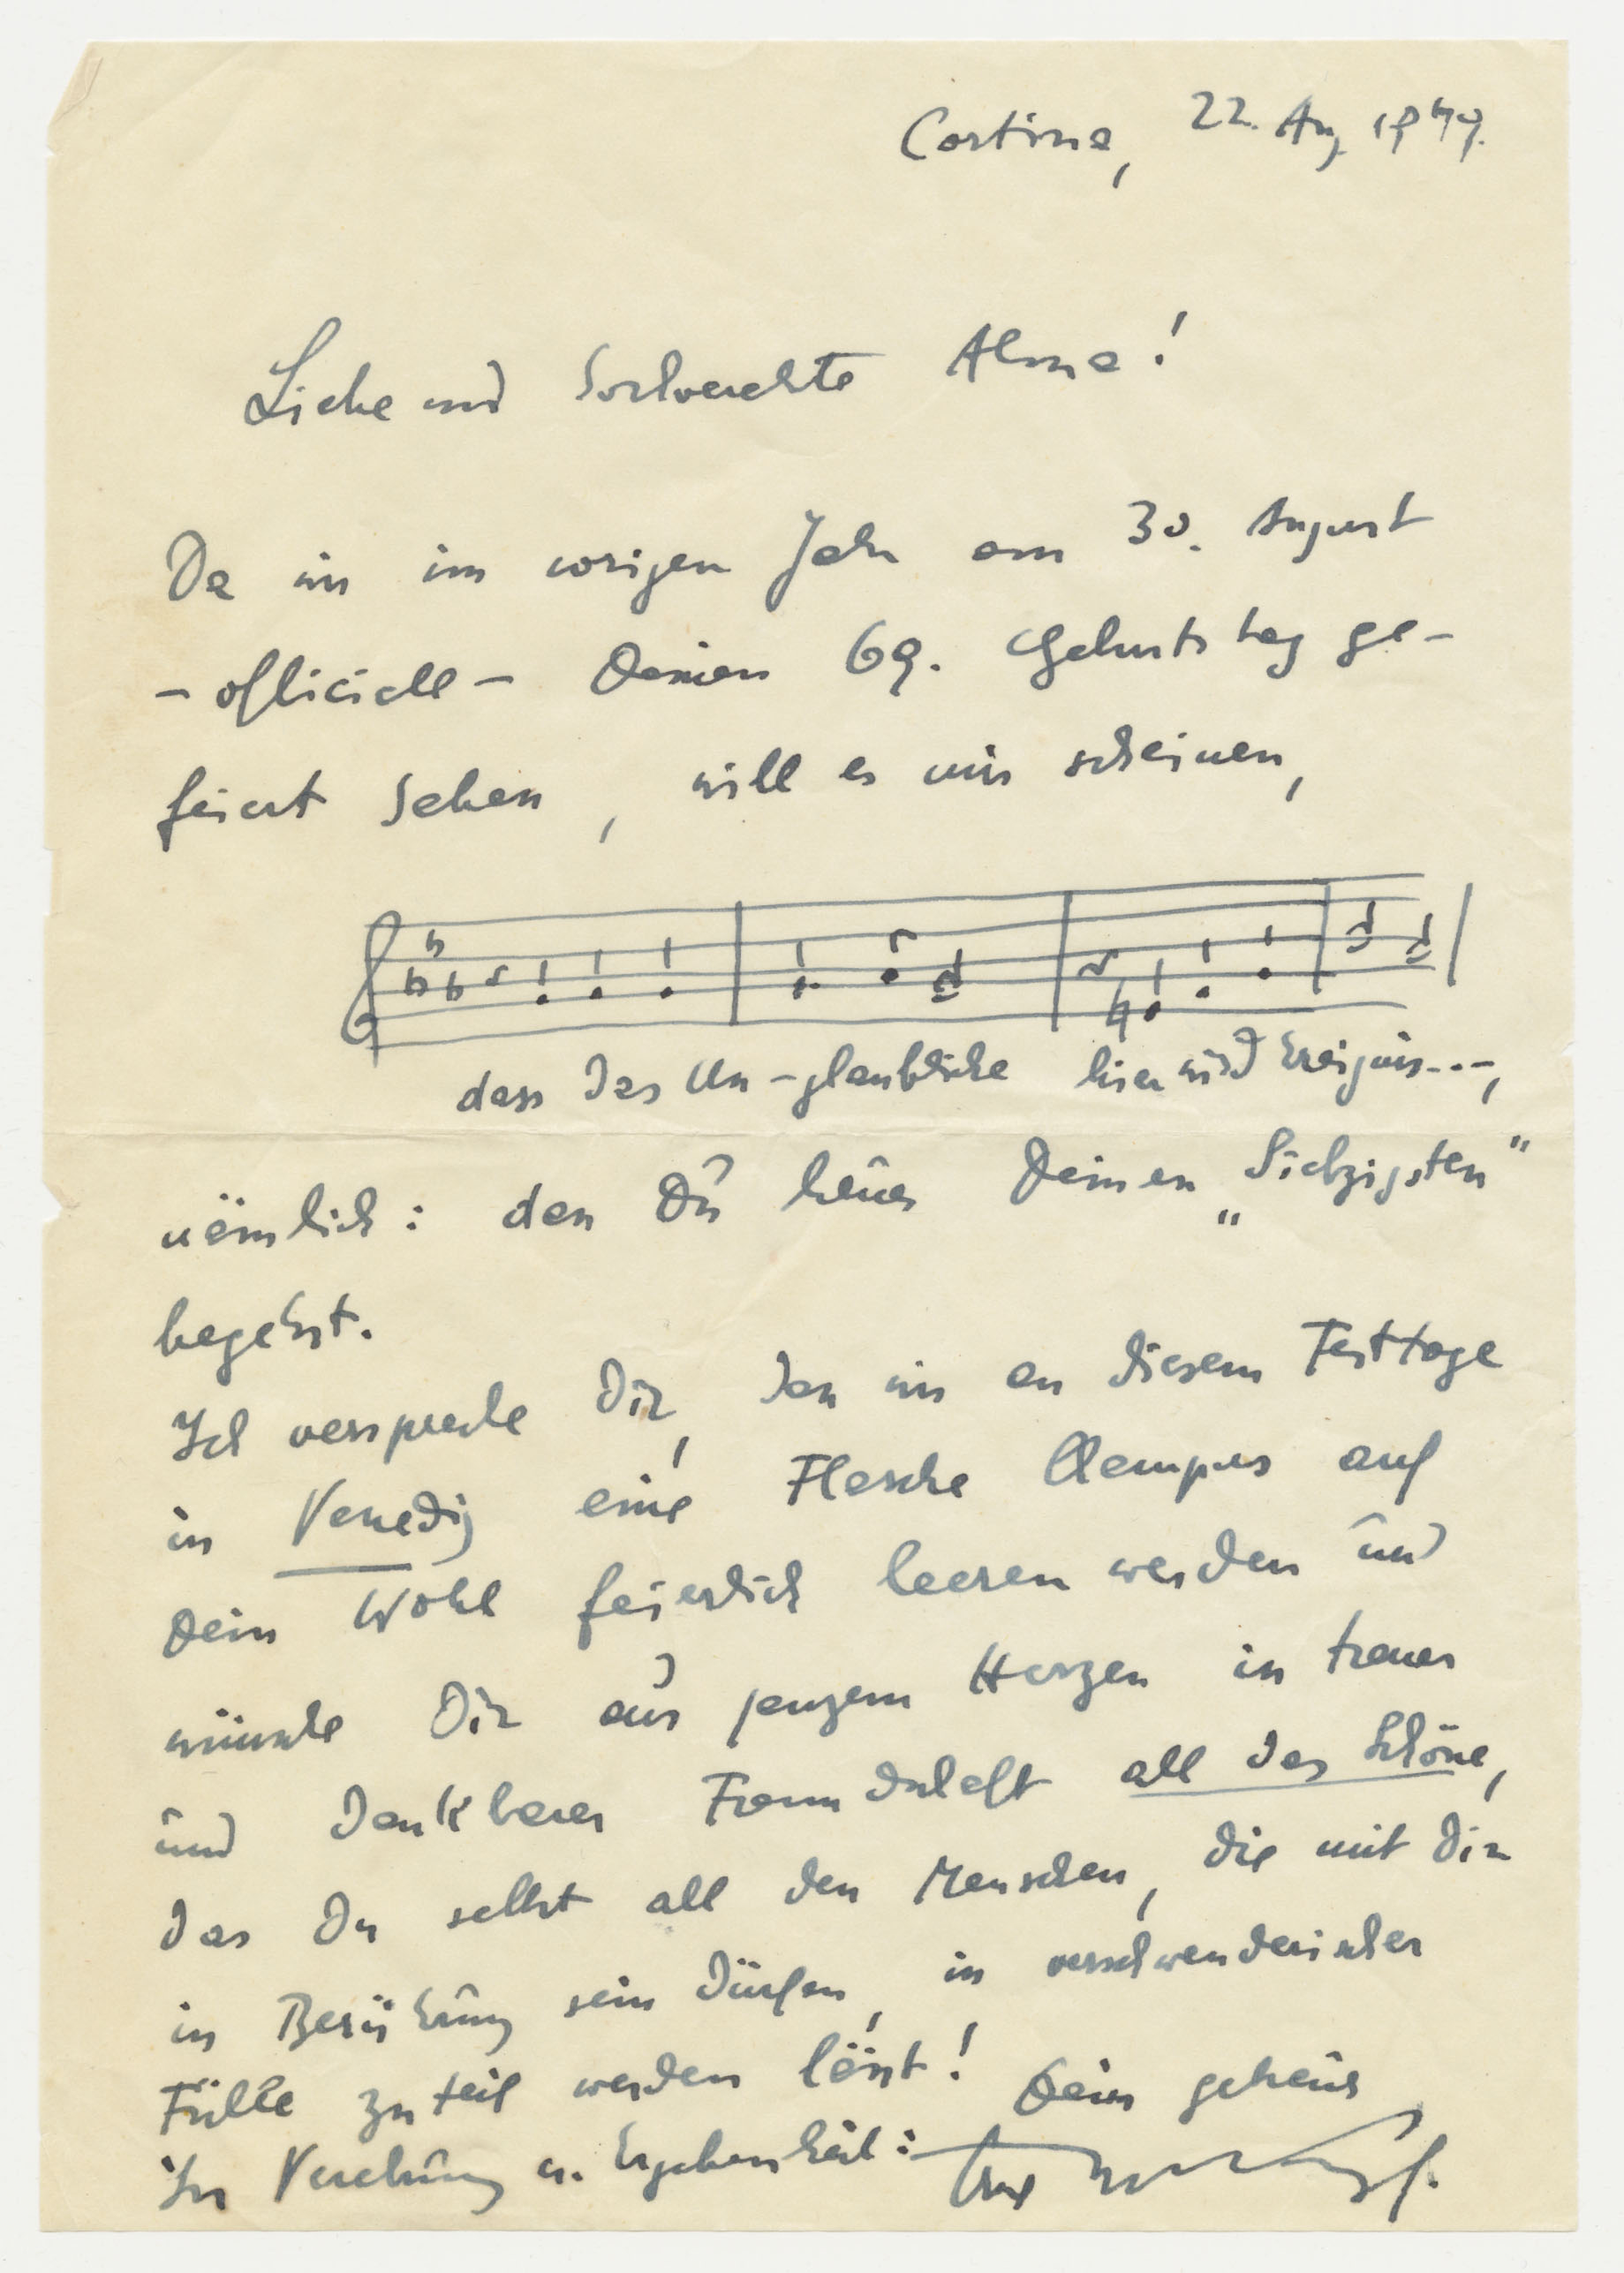 Erich Wolfgang Korngold's letter to Alma Mahler from her birthday book